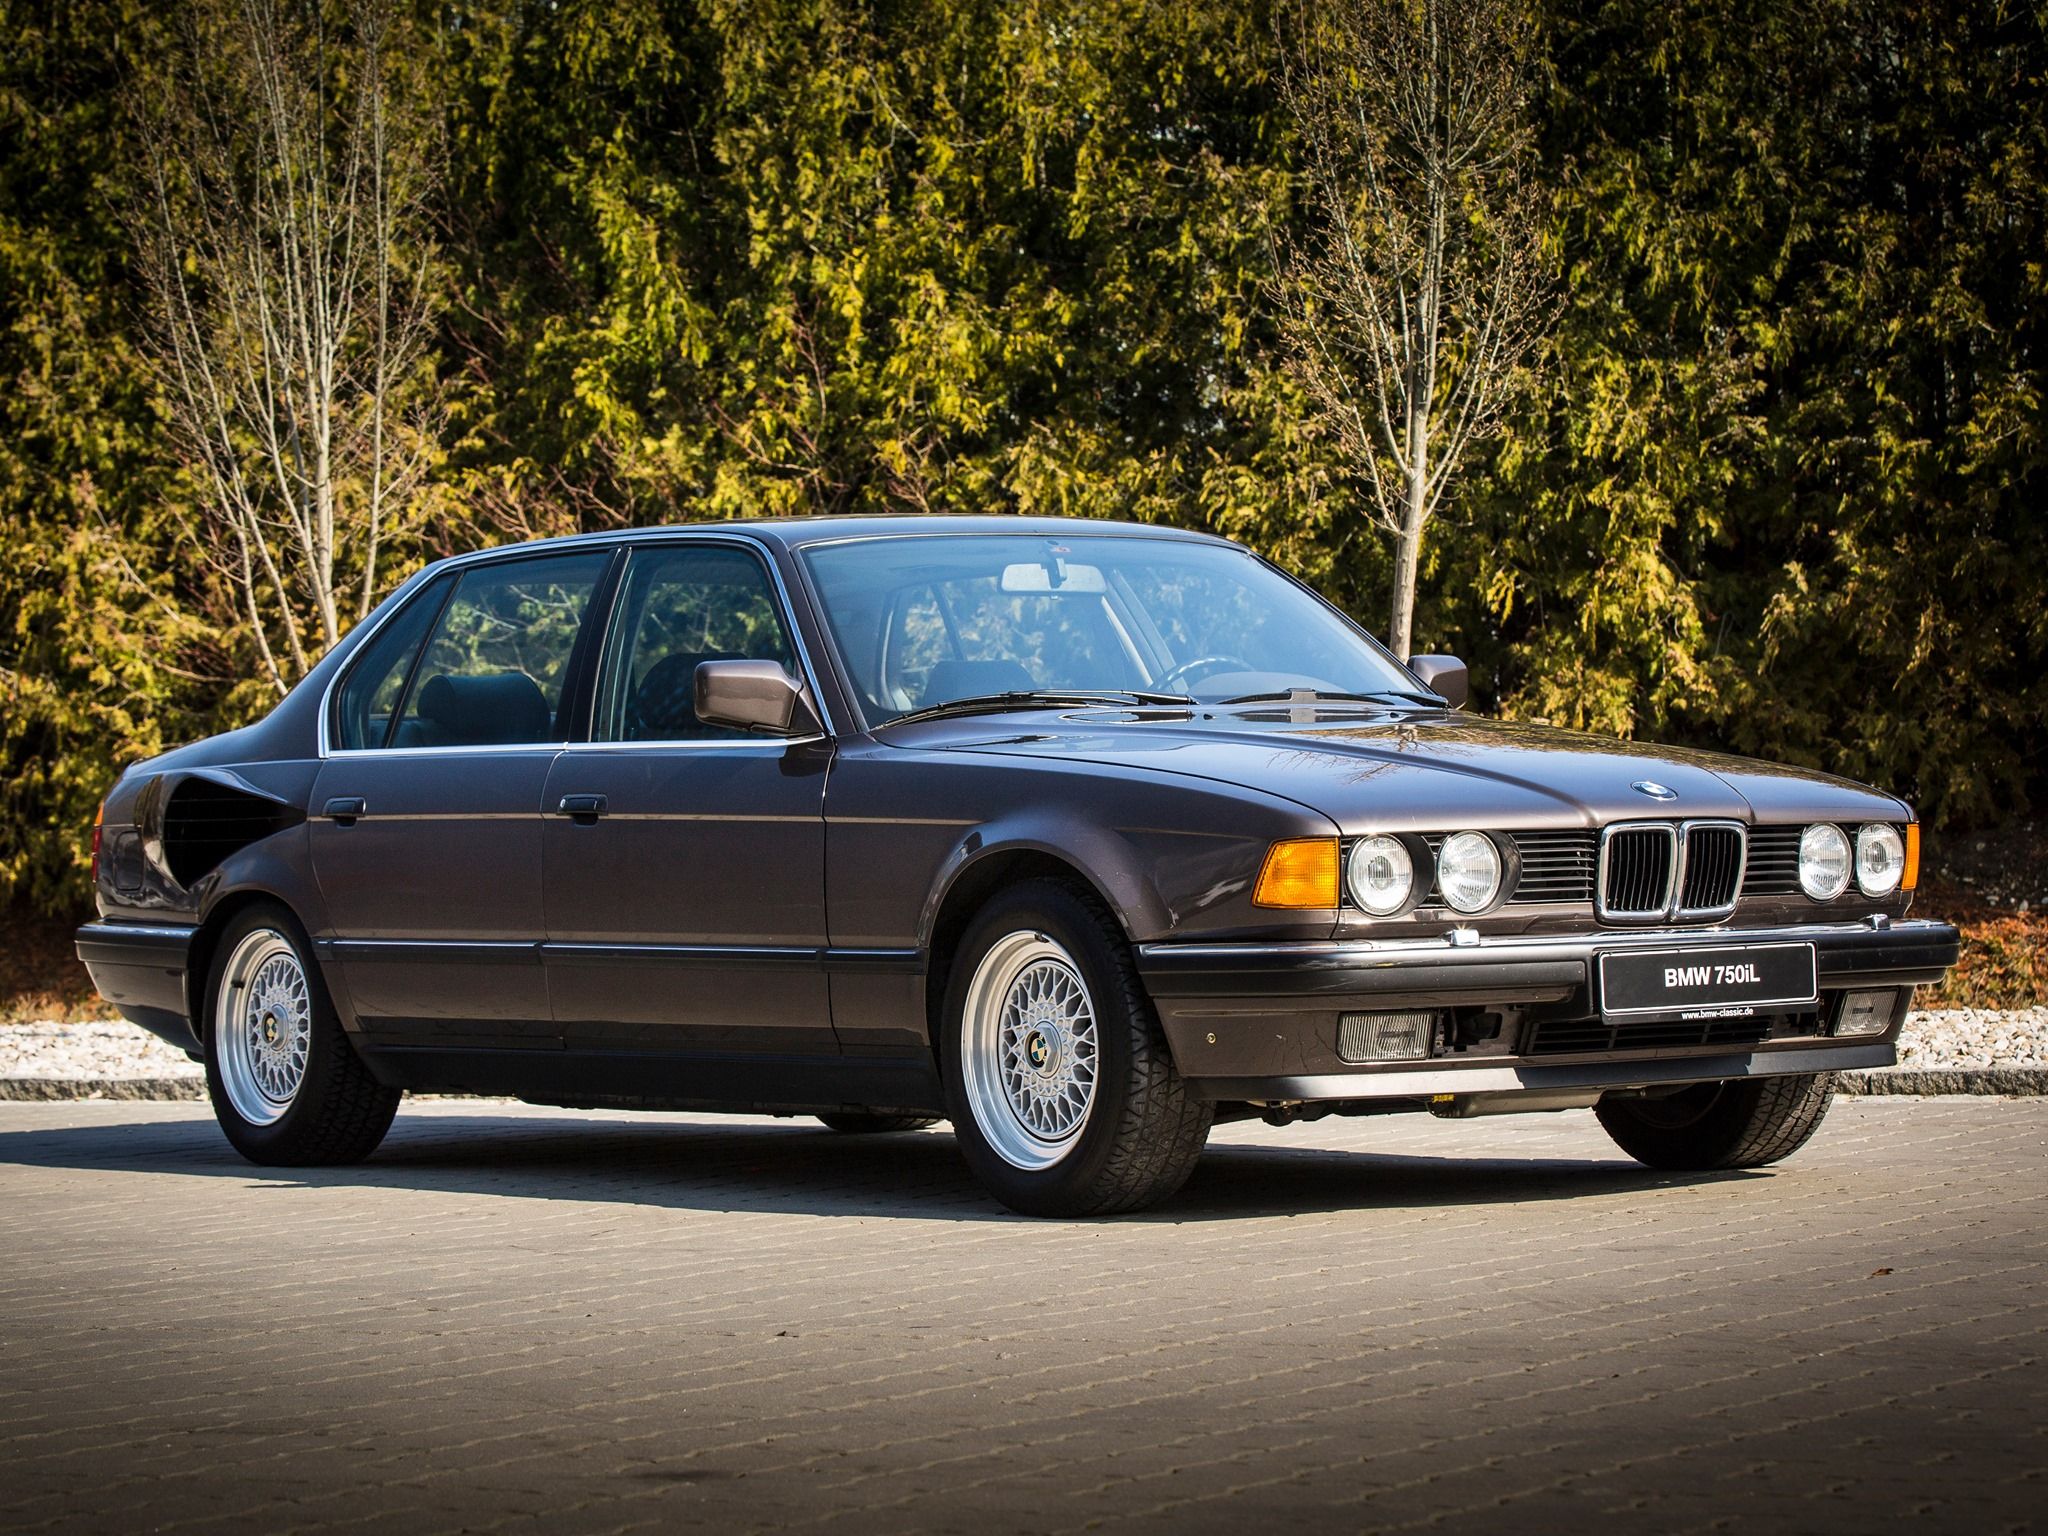 Who Remembers The V16 Powered BMW 750iL Goldfisch?